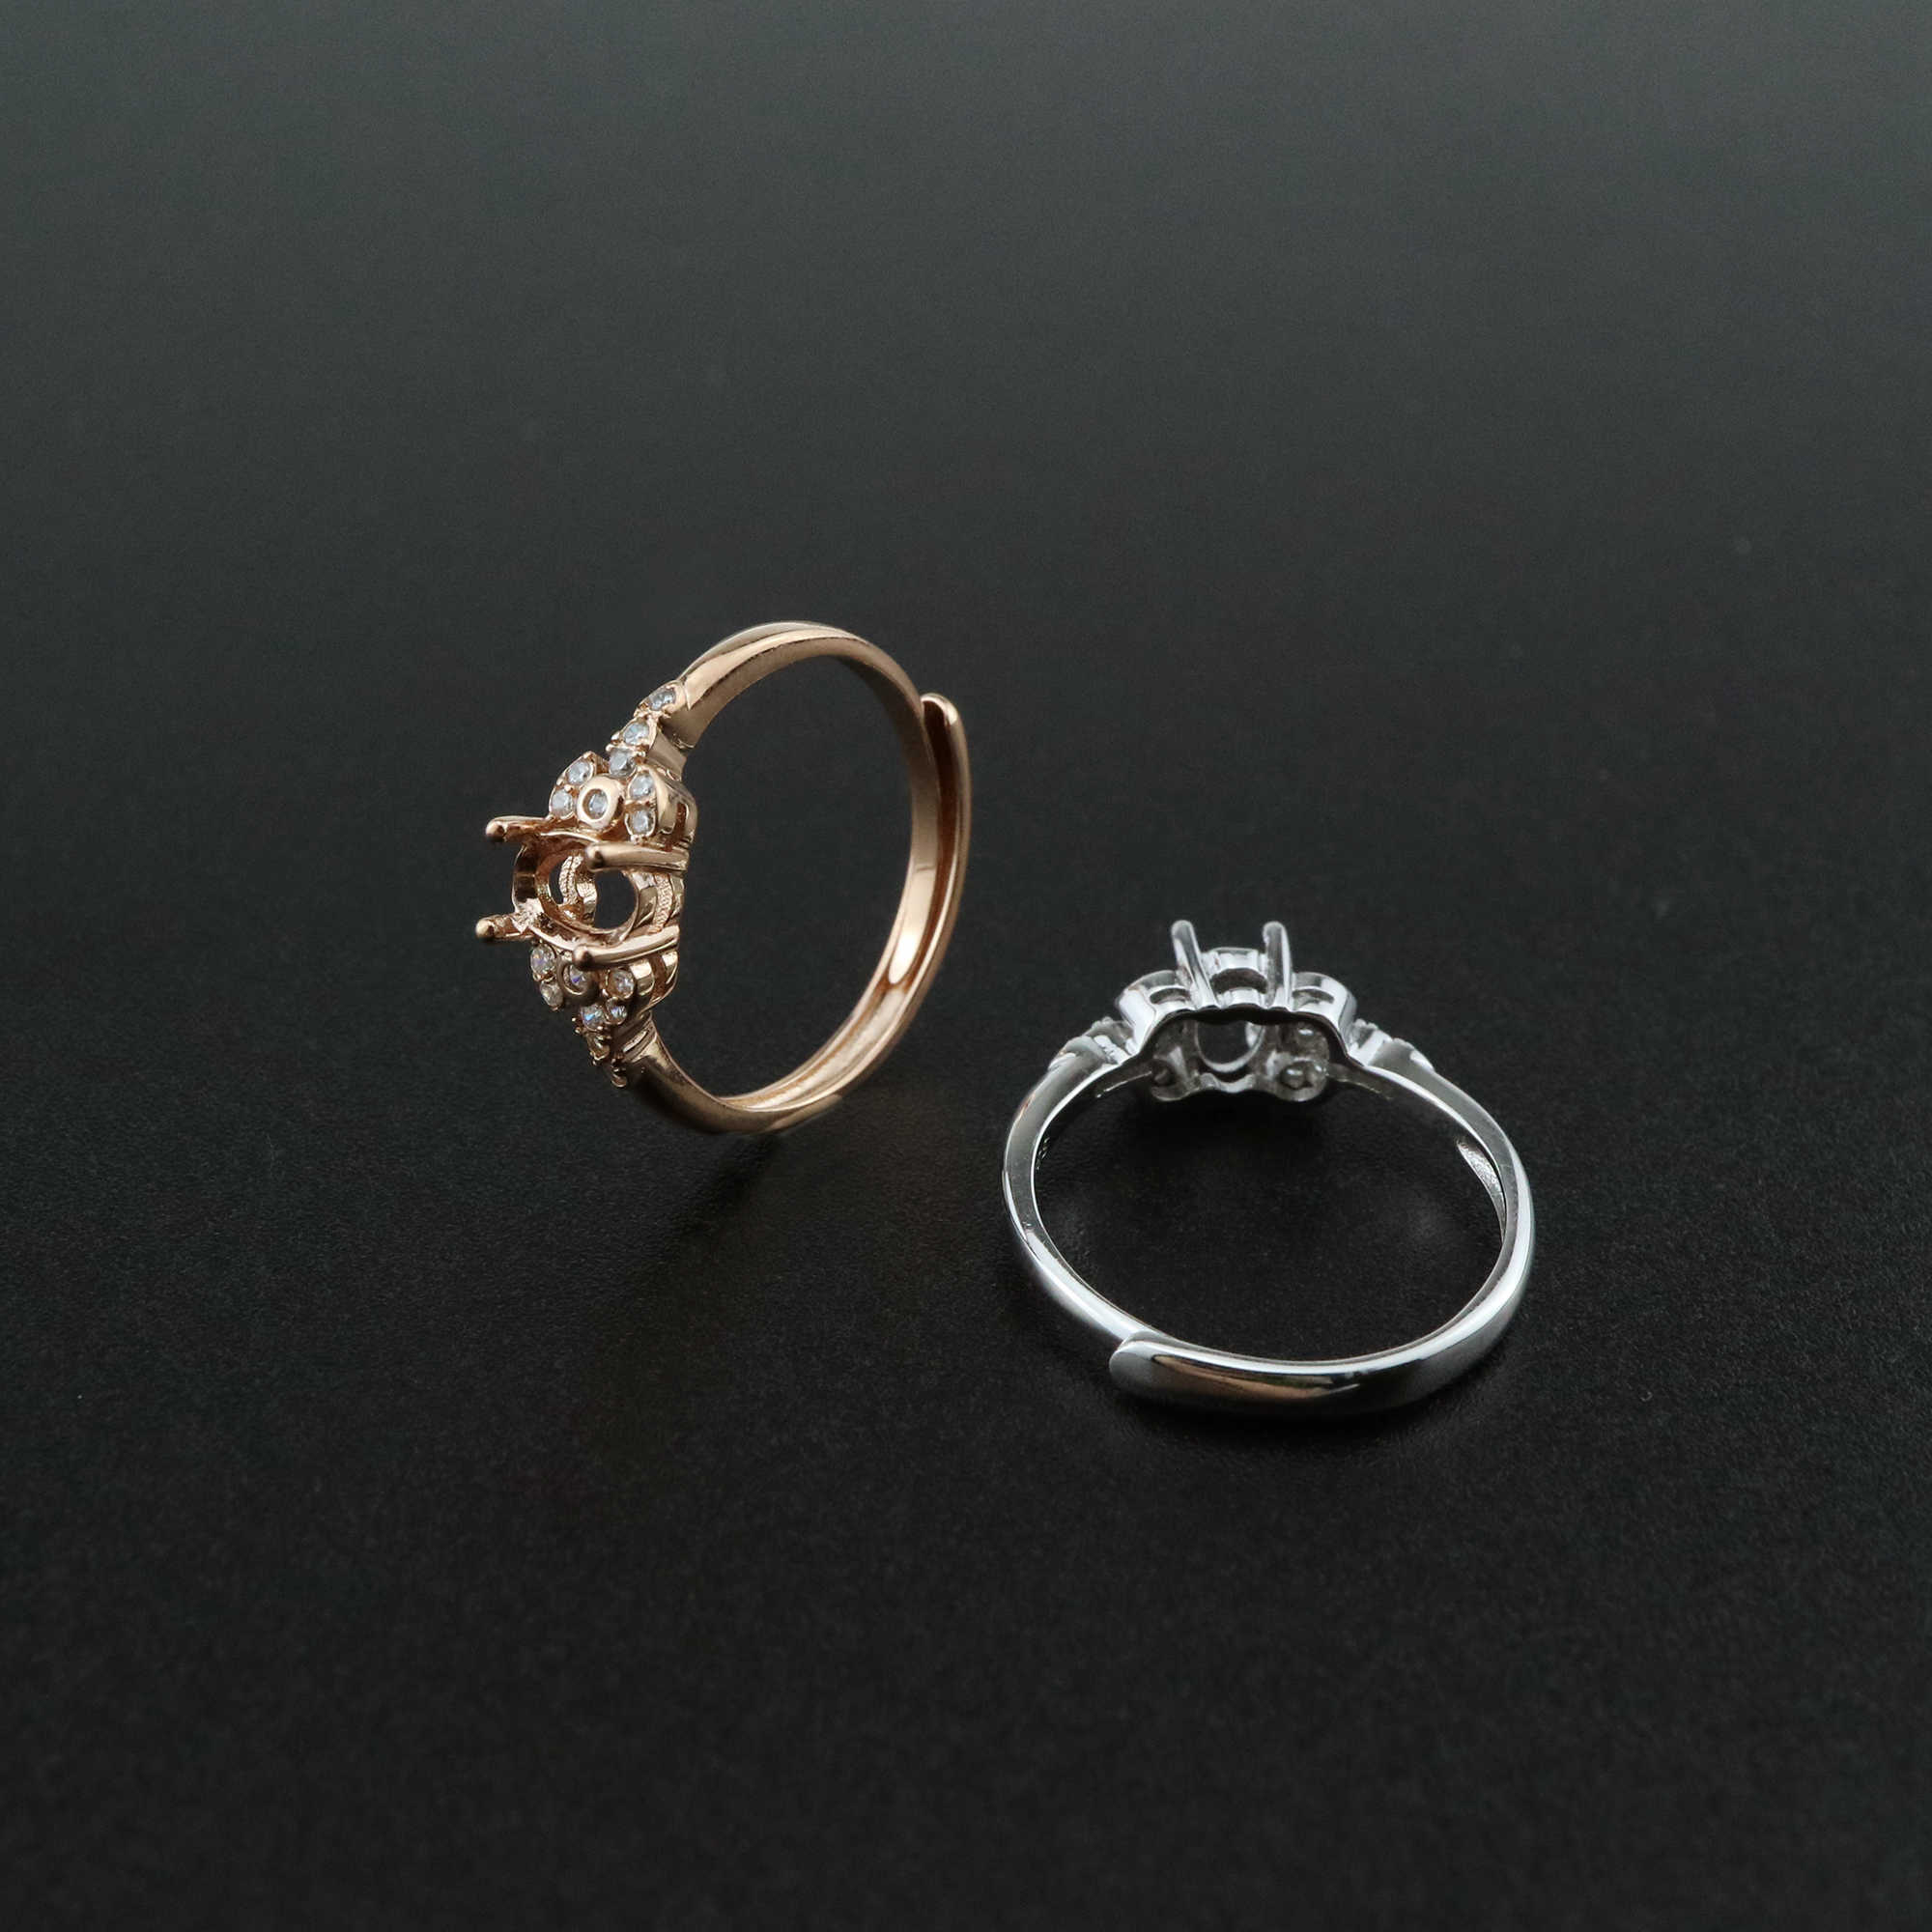 1Pcs 4x6MM Vintage Style Oval Prong Bezel Rose Gold Plated Solid 925 Sterling Silver Adjustable Ring Settings for Moissanite Gemstone DIY Supplies 1224027 - Click Image to Close